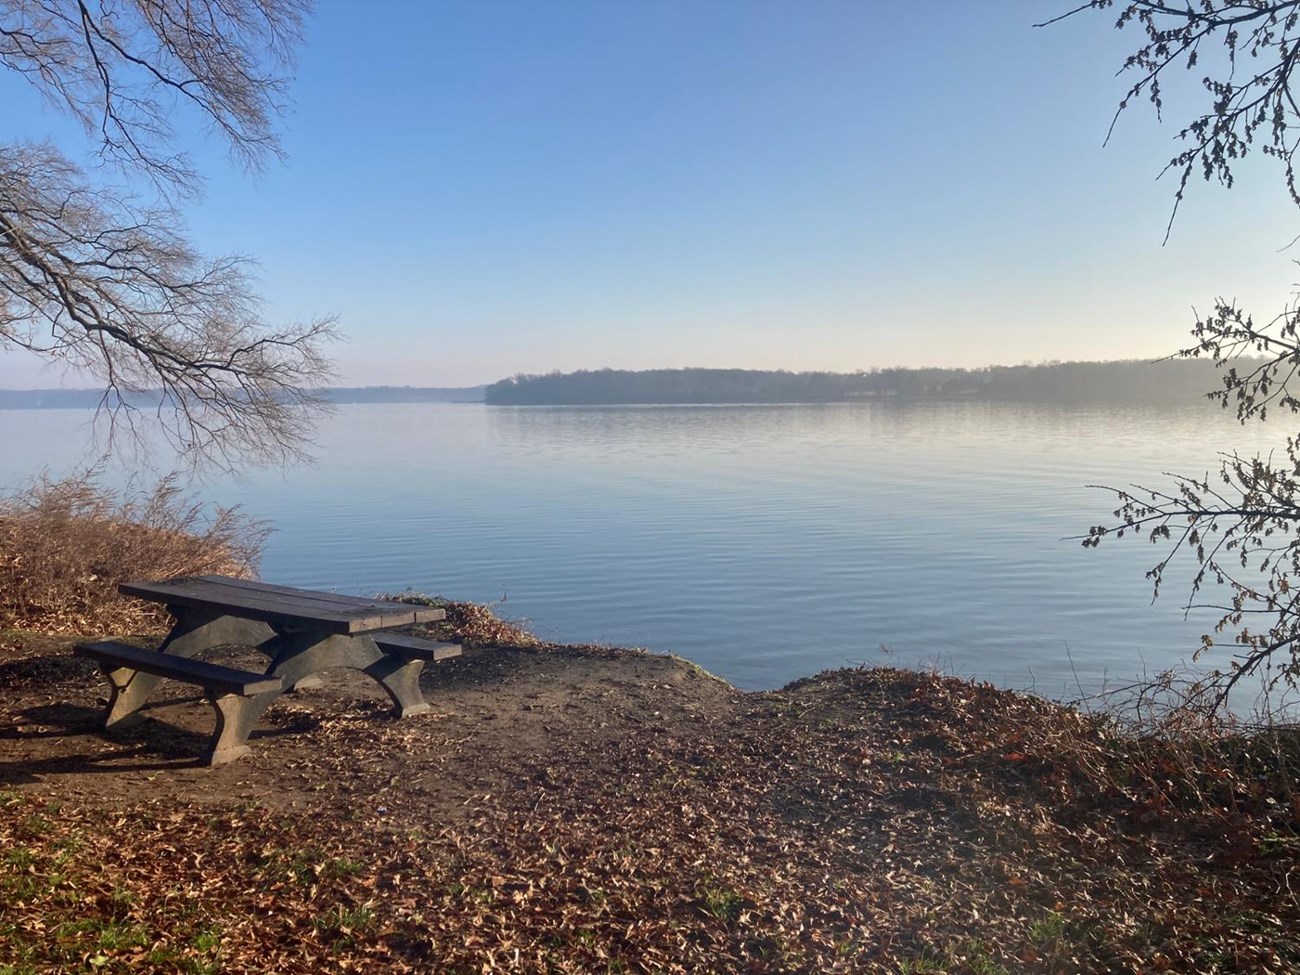 Seat of Morning (Collingwood Picnic Area on the Potomac, Daniel Blier)